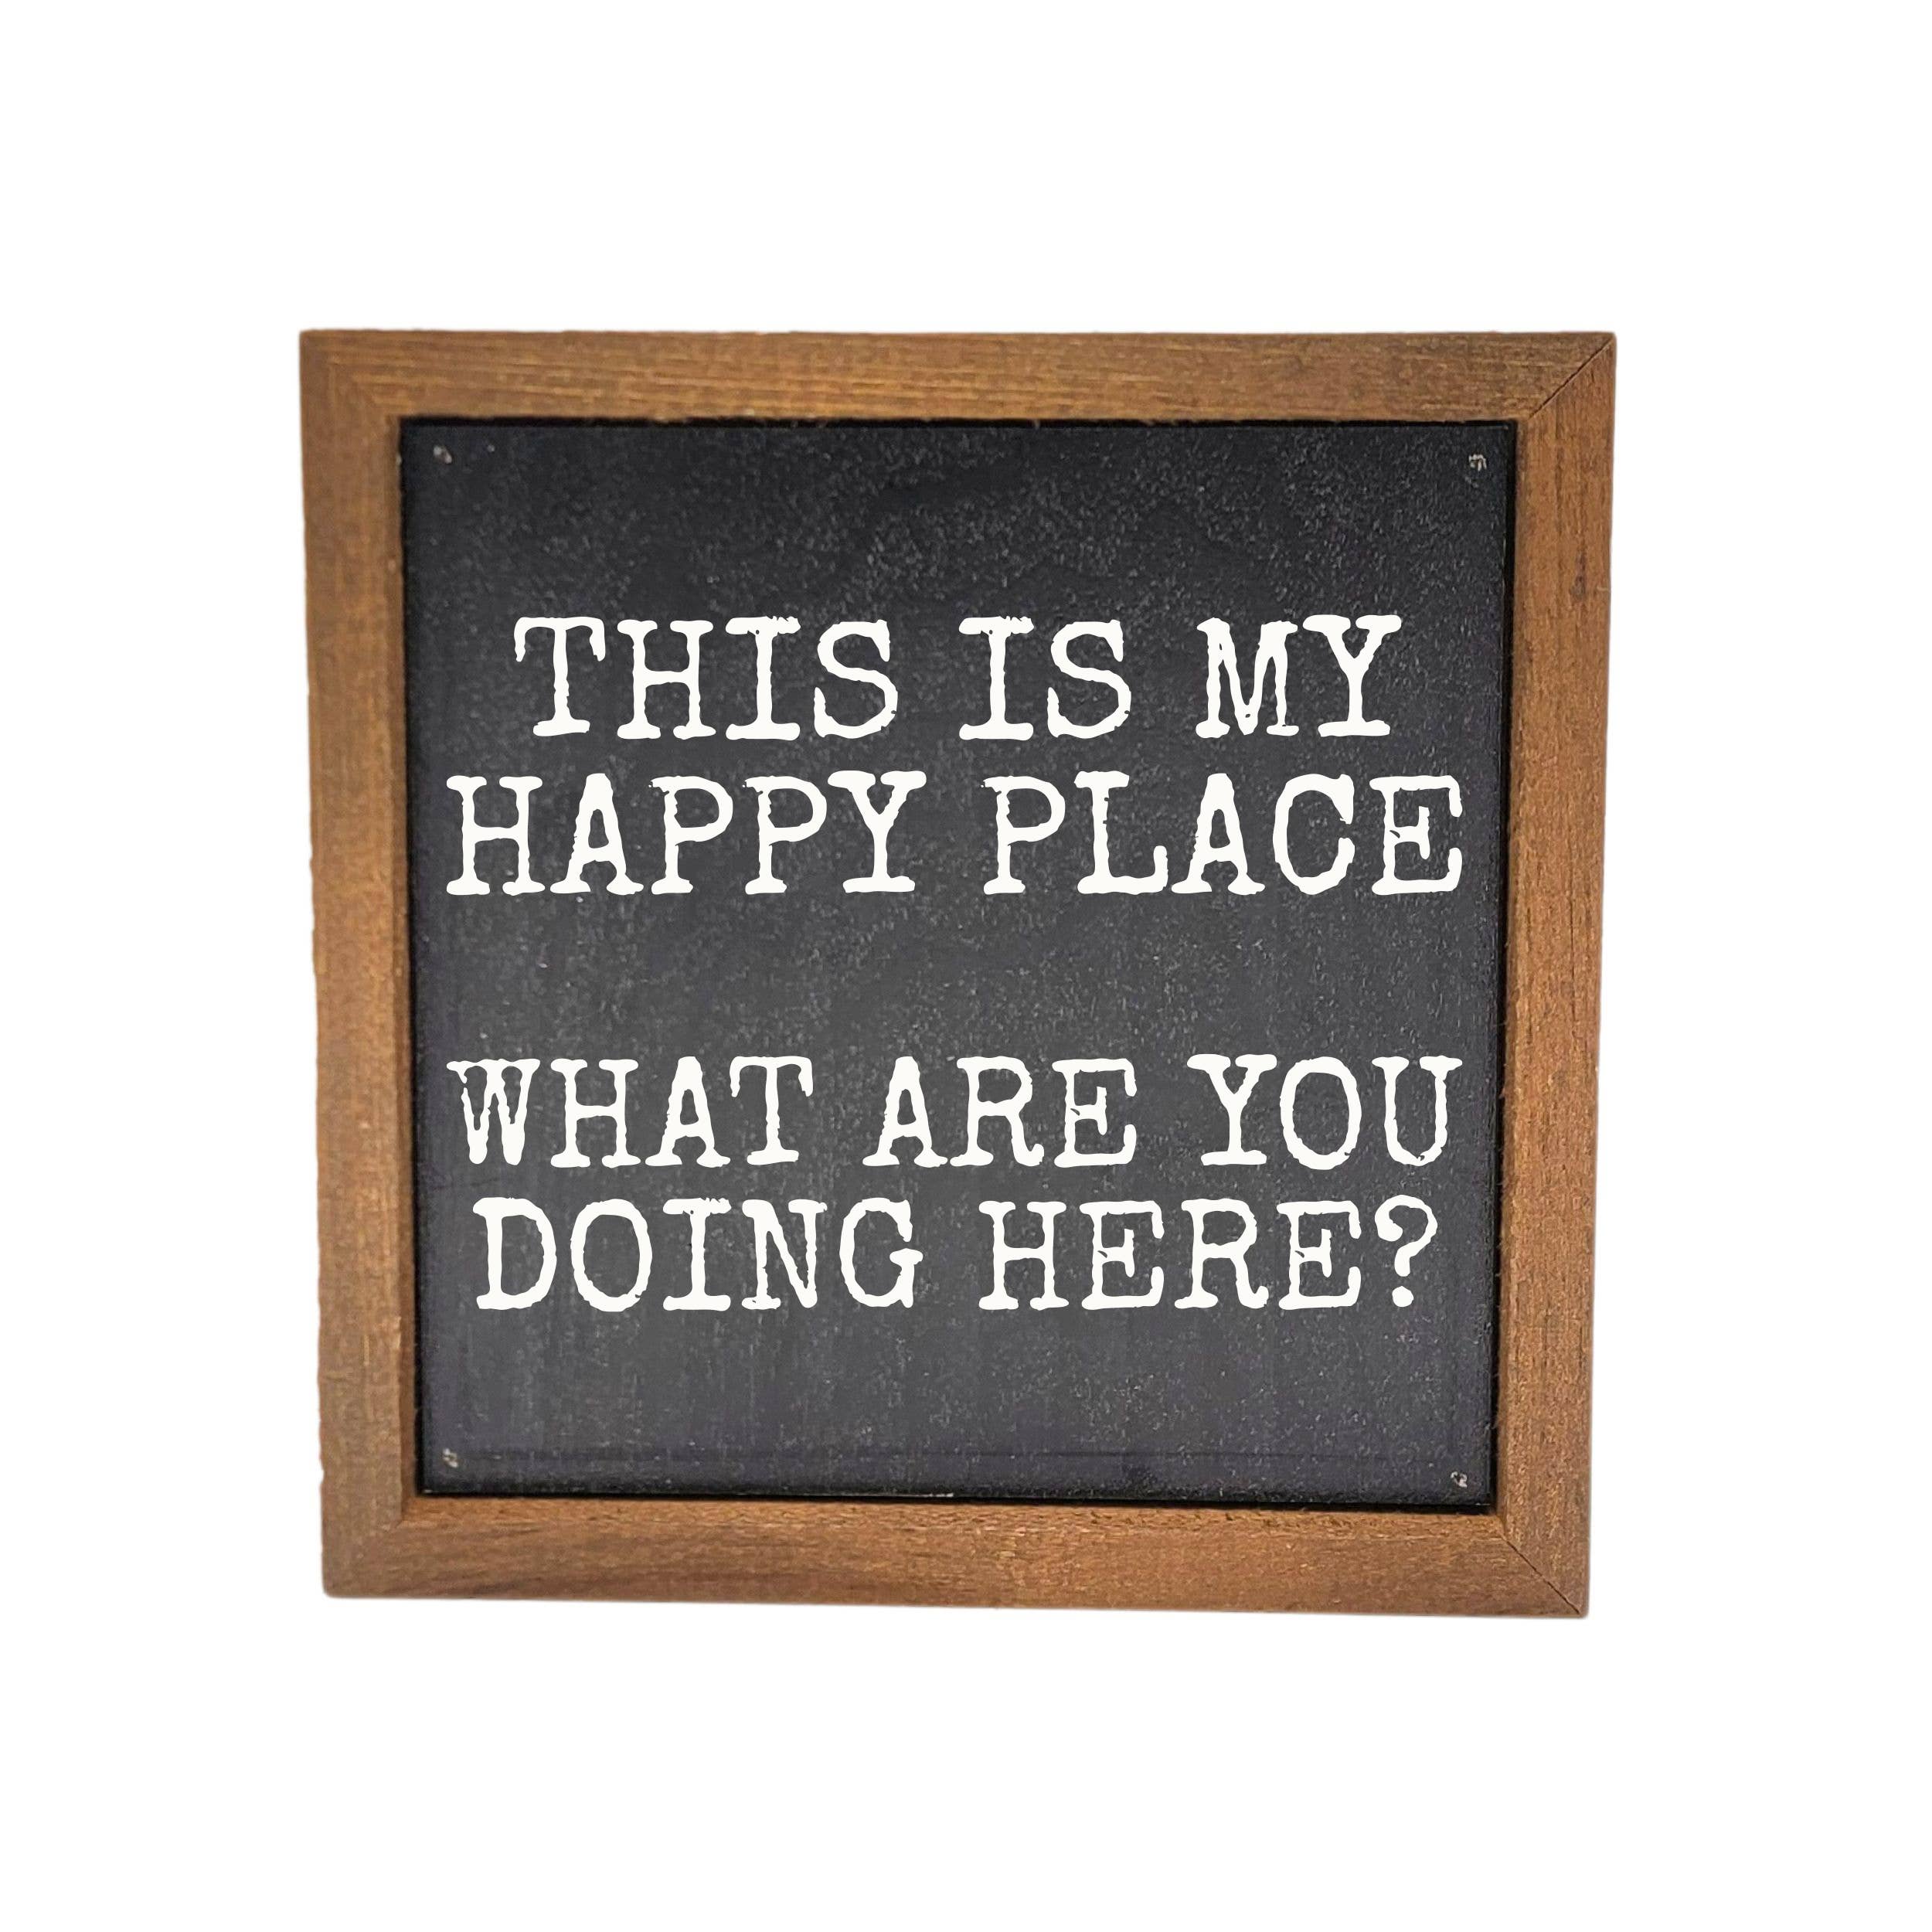 What Are You Doing Here? - Home Decor - Funny Sign